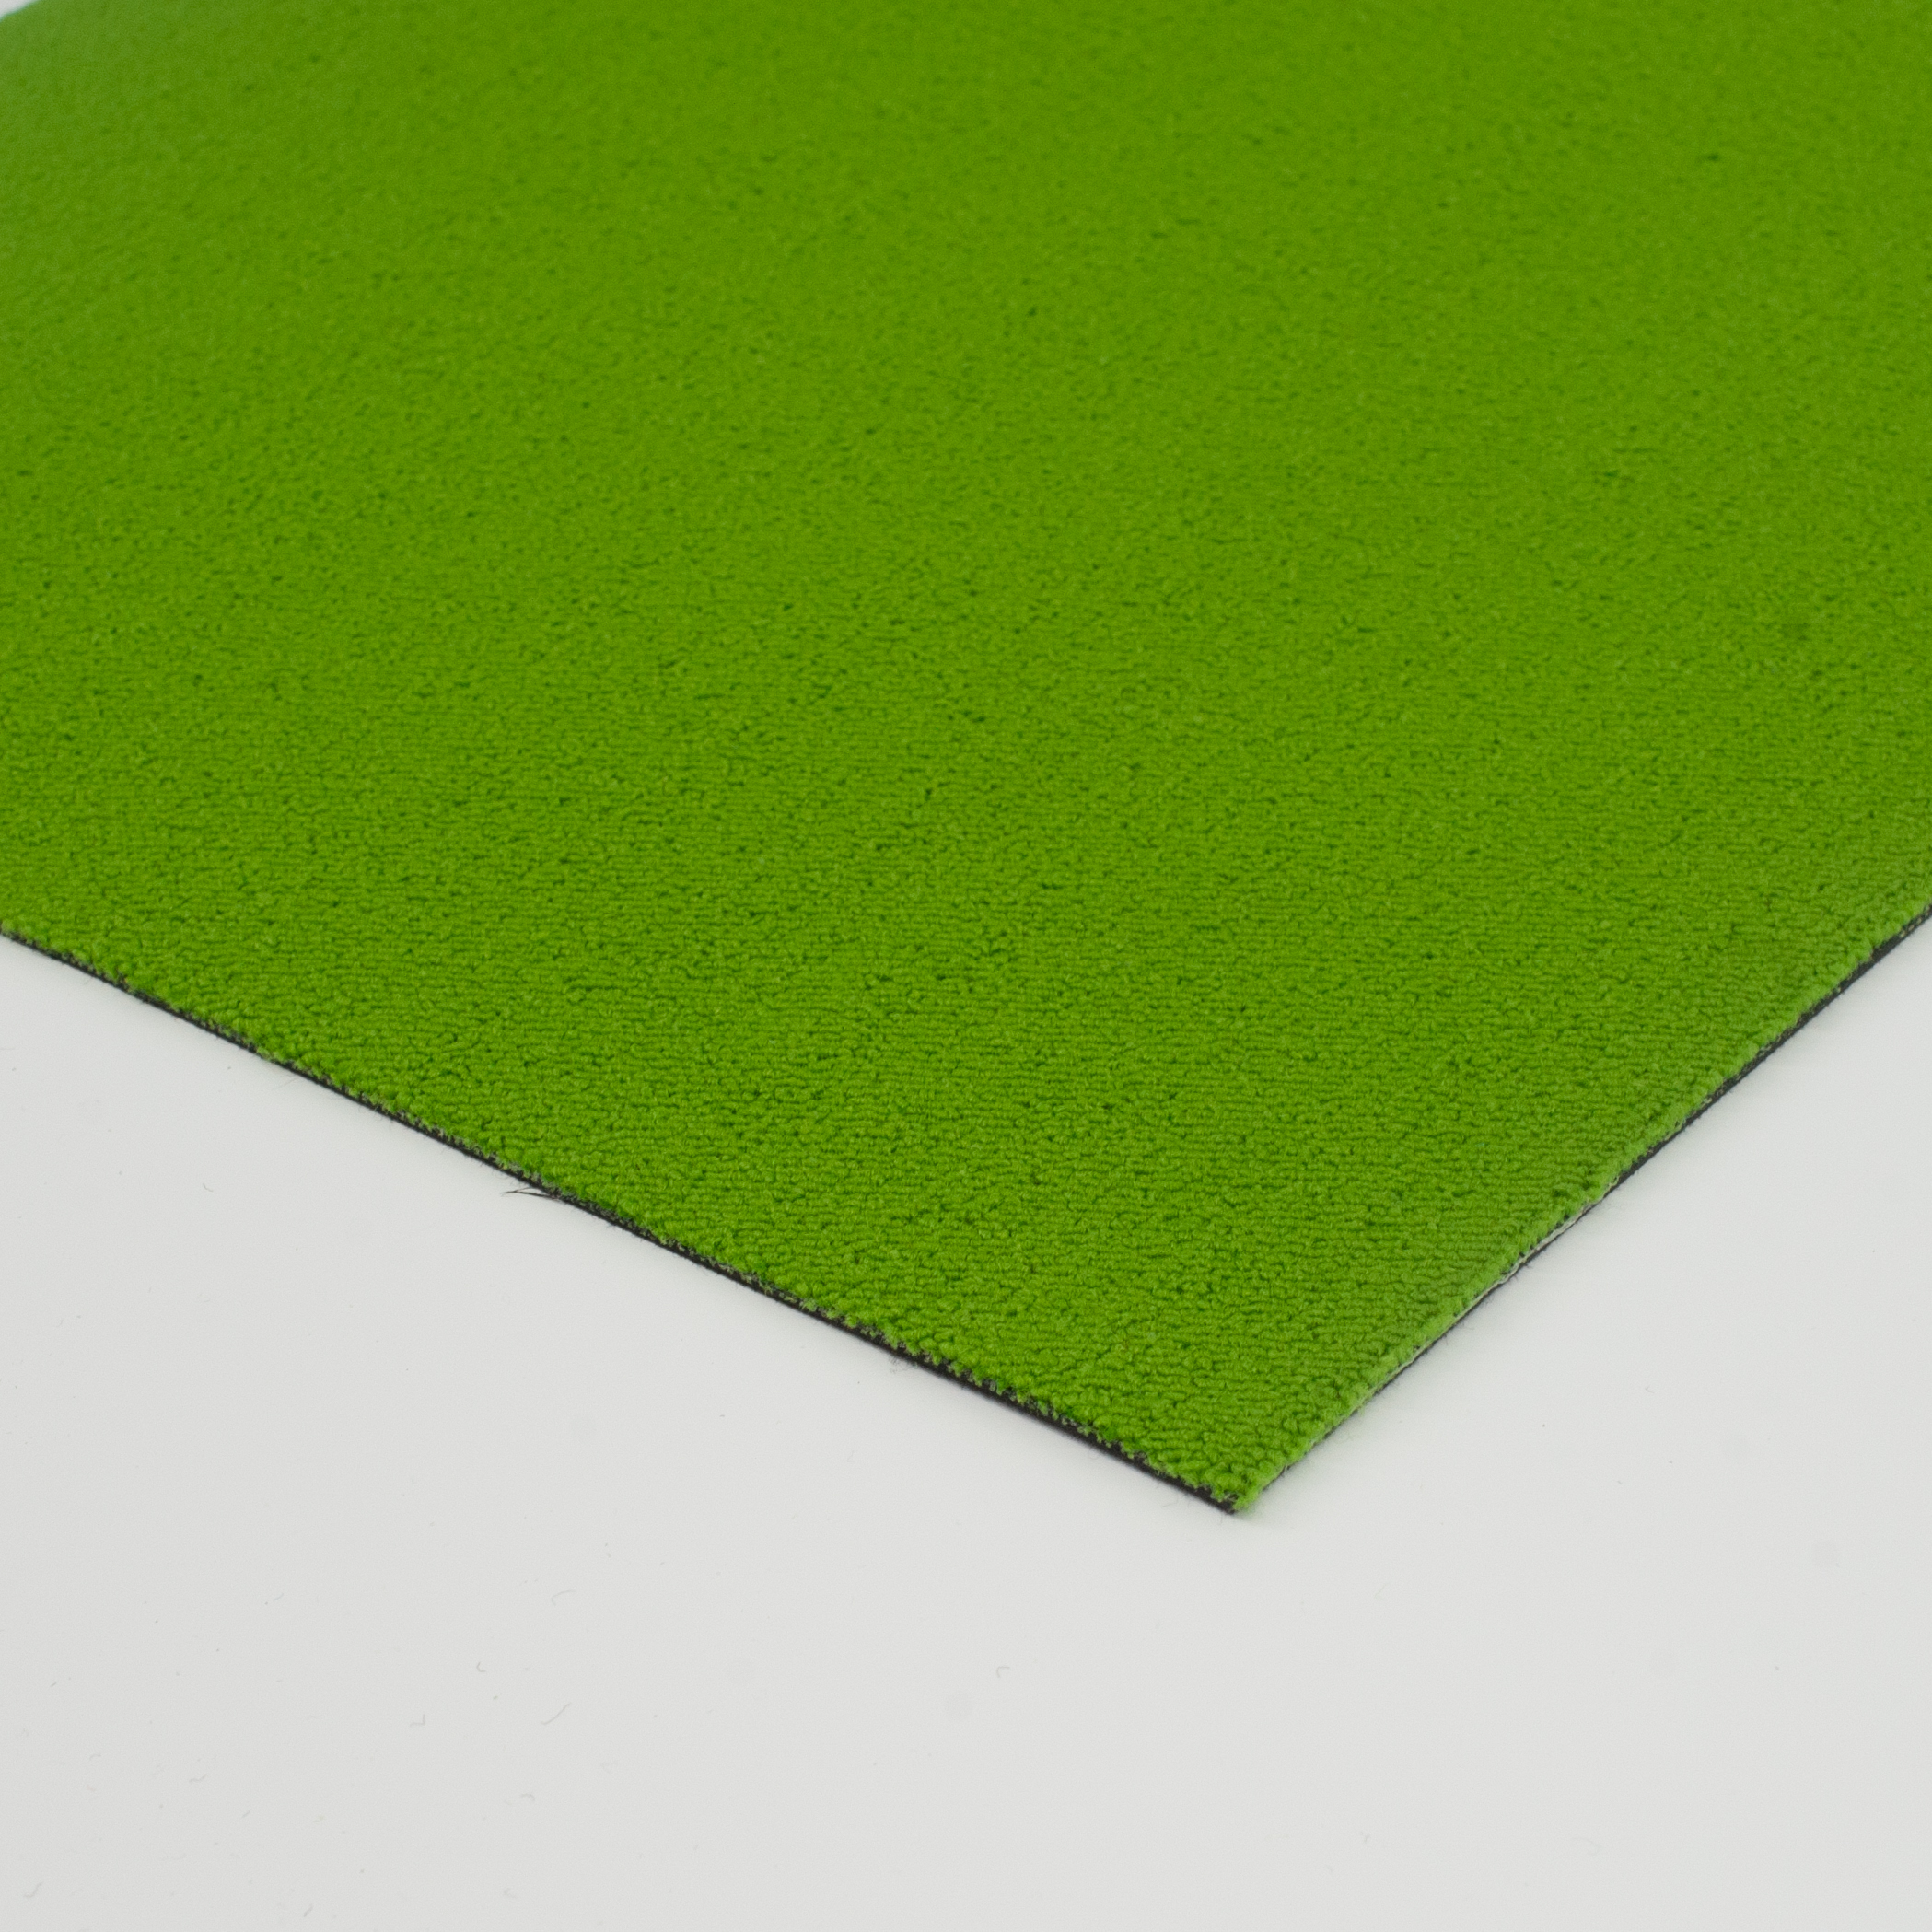 Large Recyclable Colorful Carpet Tiles